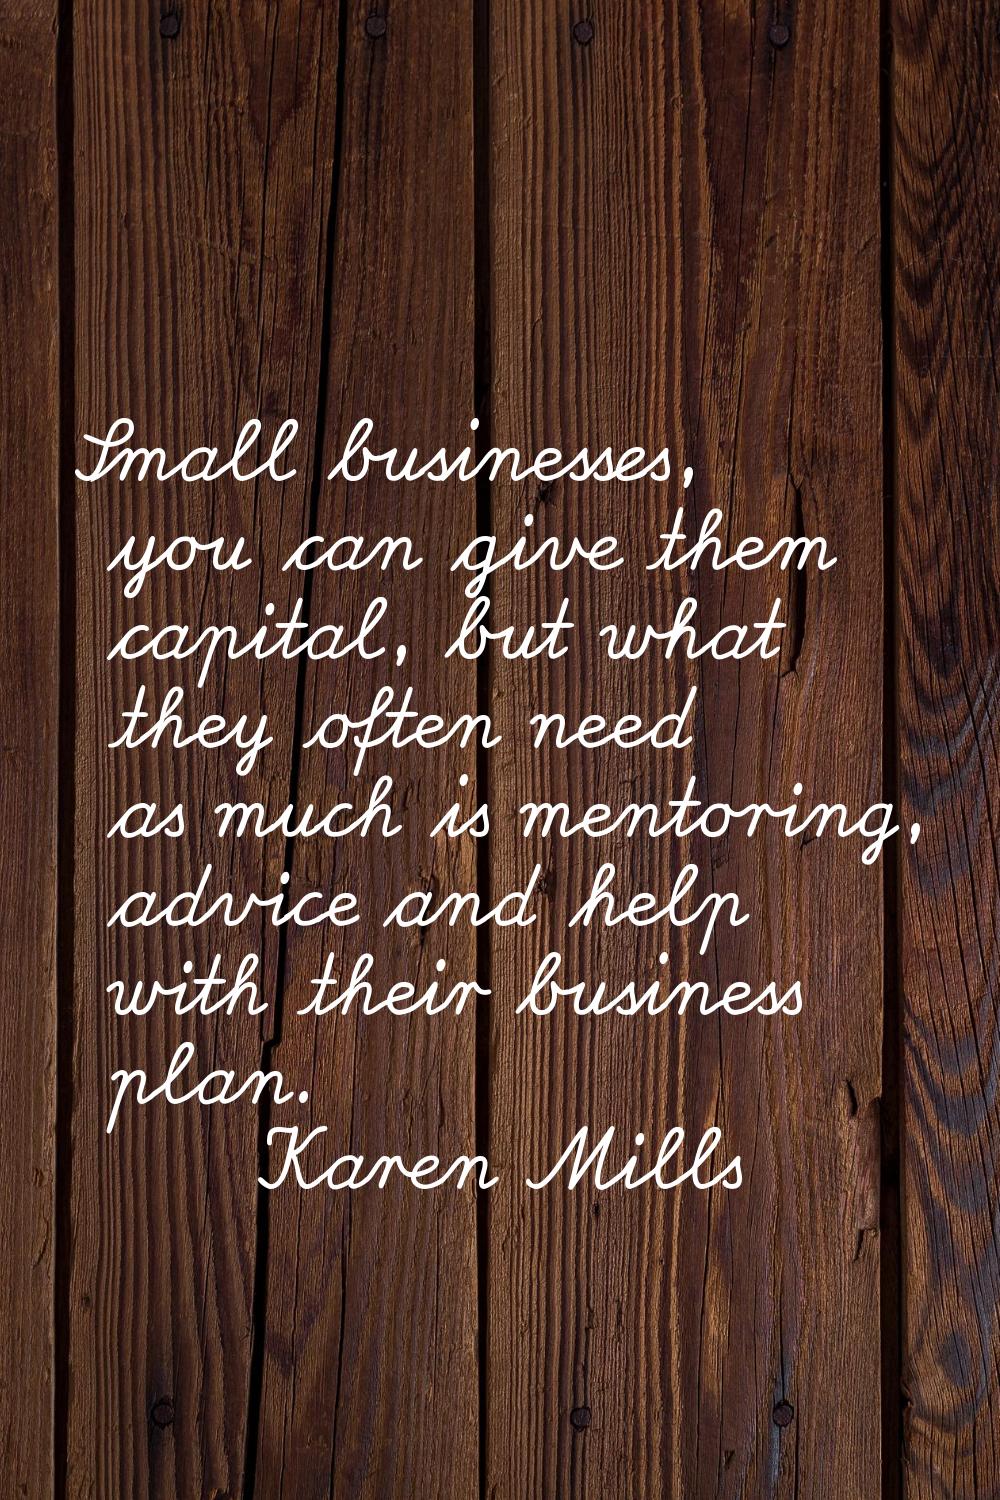 Small businesses, you can give them capital, but what they often need as much is mentoring, advice 